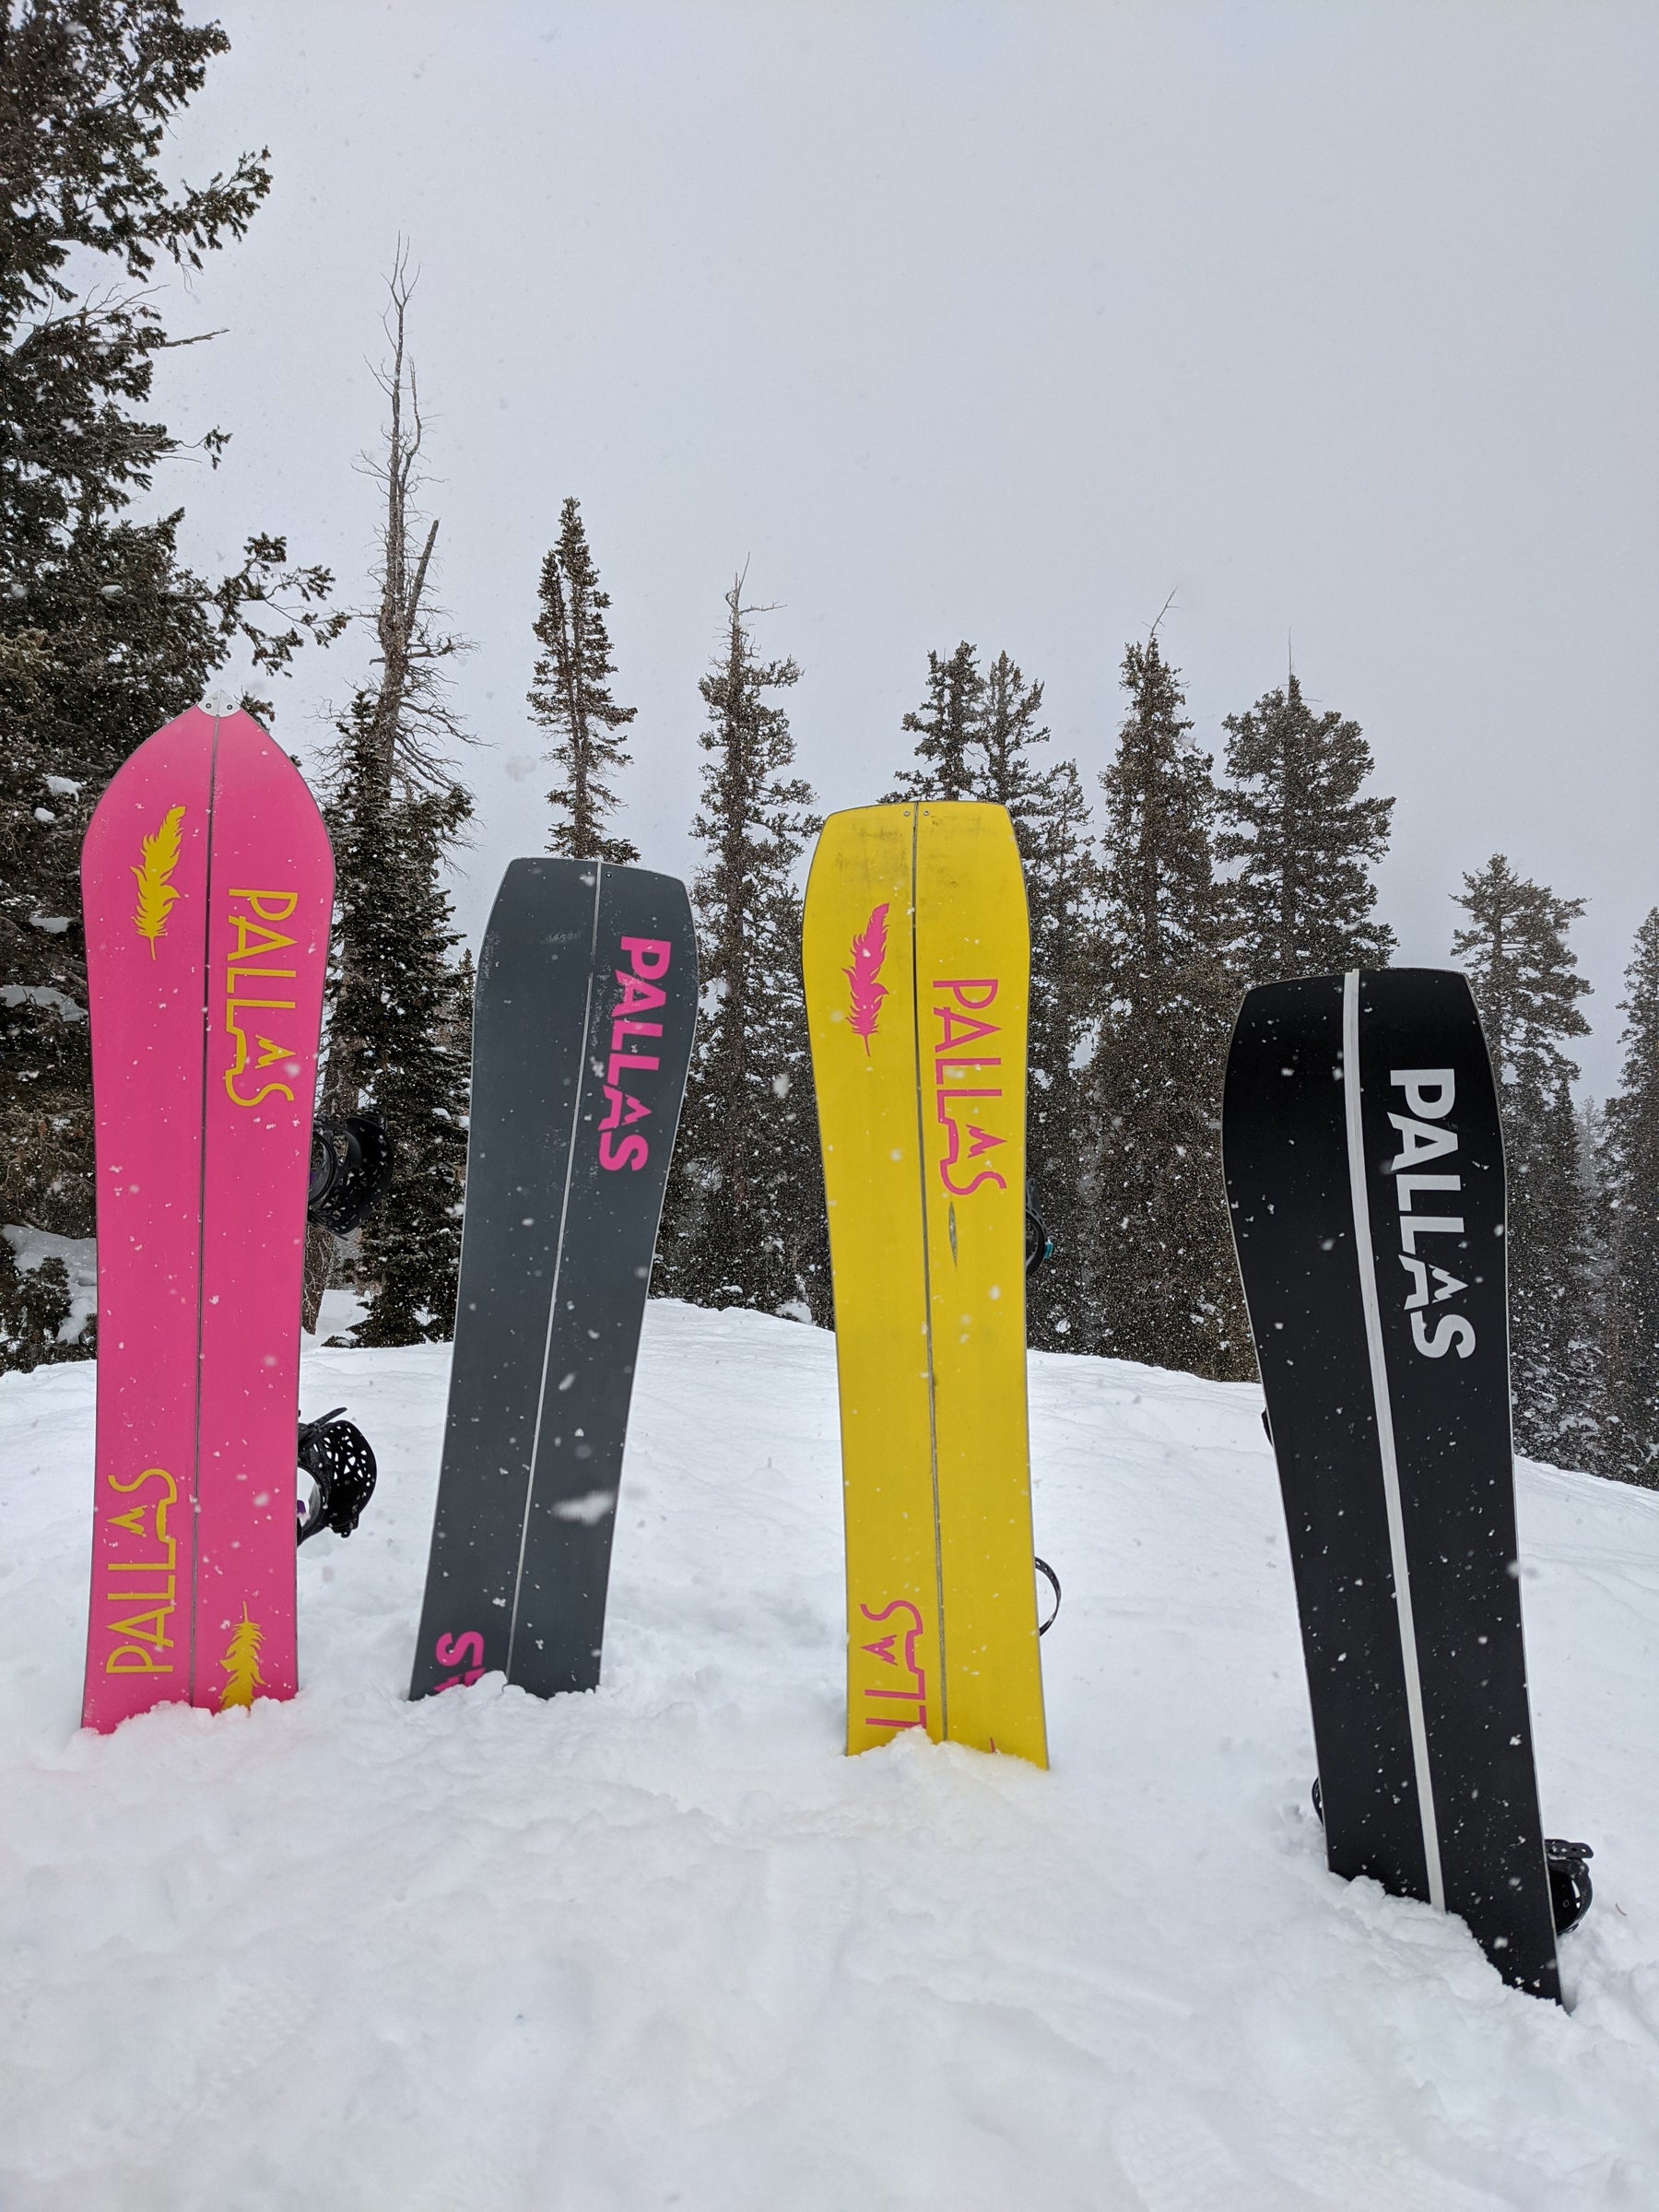 Four different Pallas splitboards are standing upright in the snow, including the Epiphany Alpine Series. This photo shows the difference in inside edge construction between the Epiphany Alpine Series and normal splitboards.